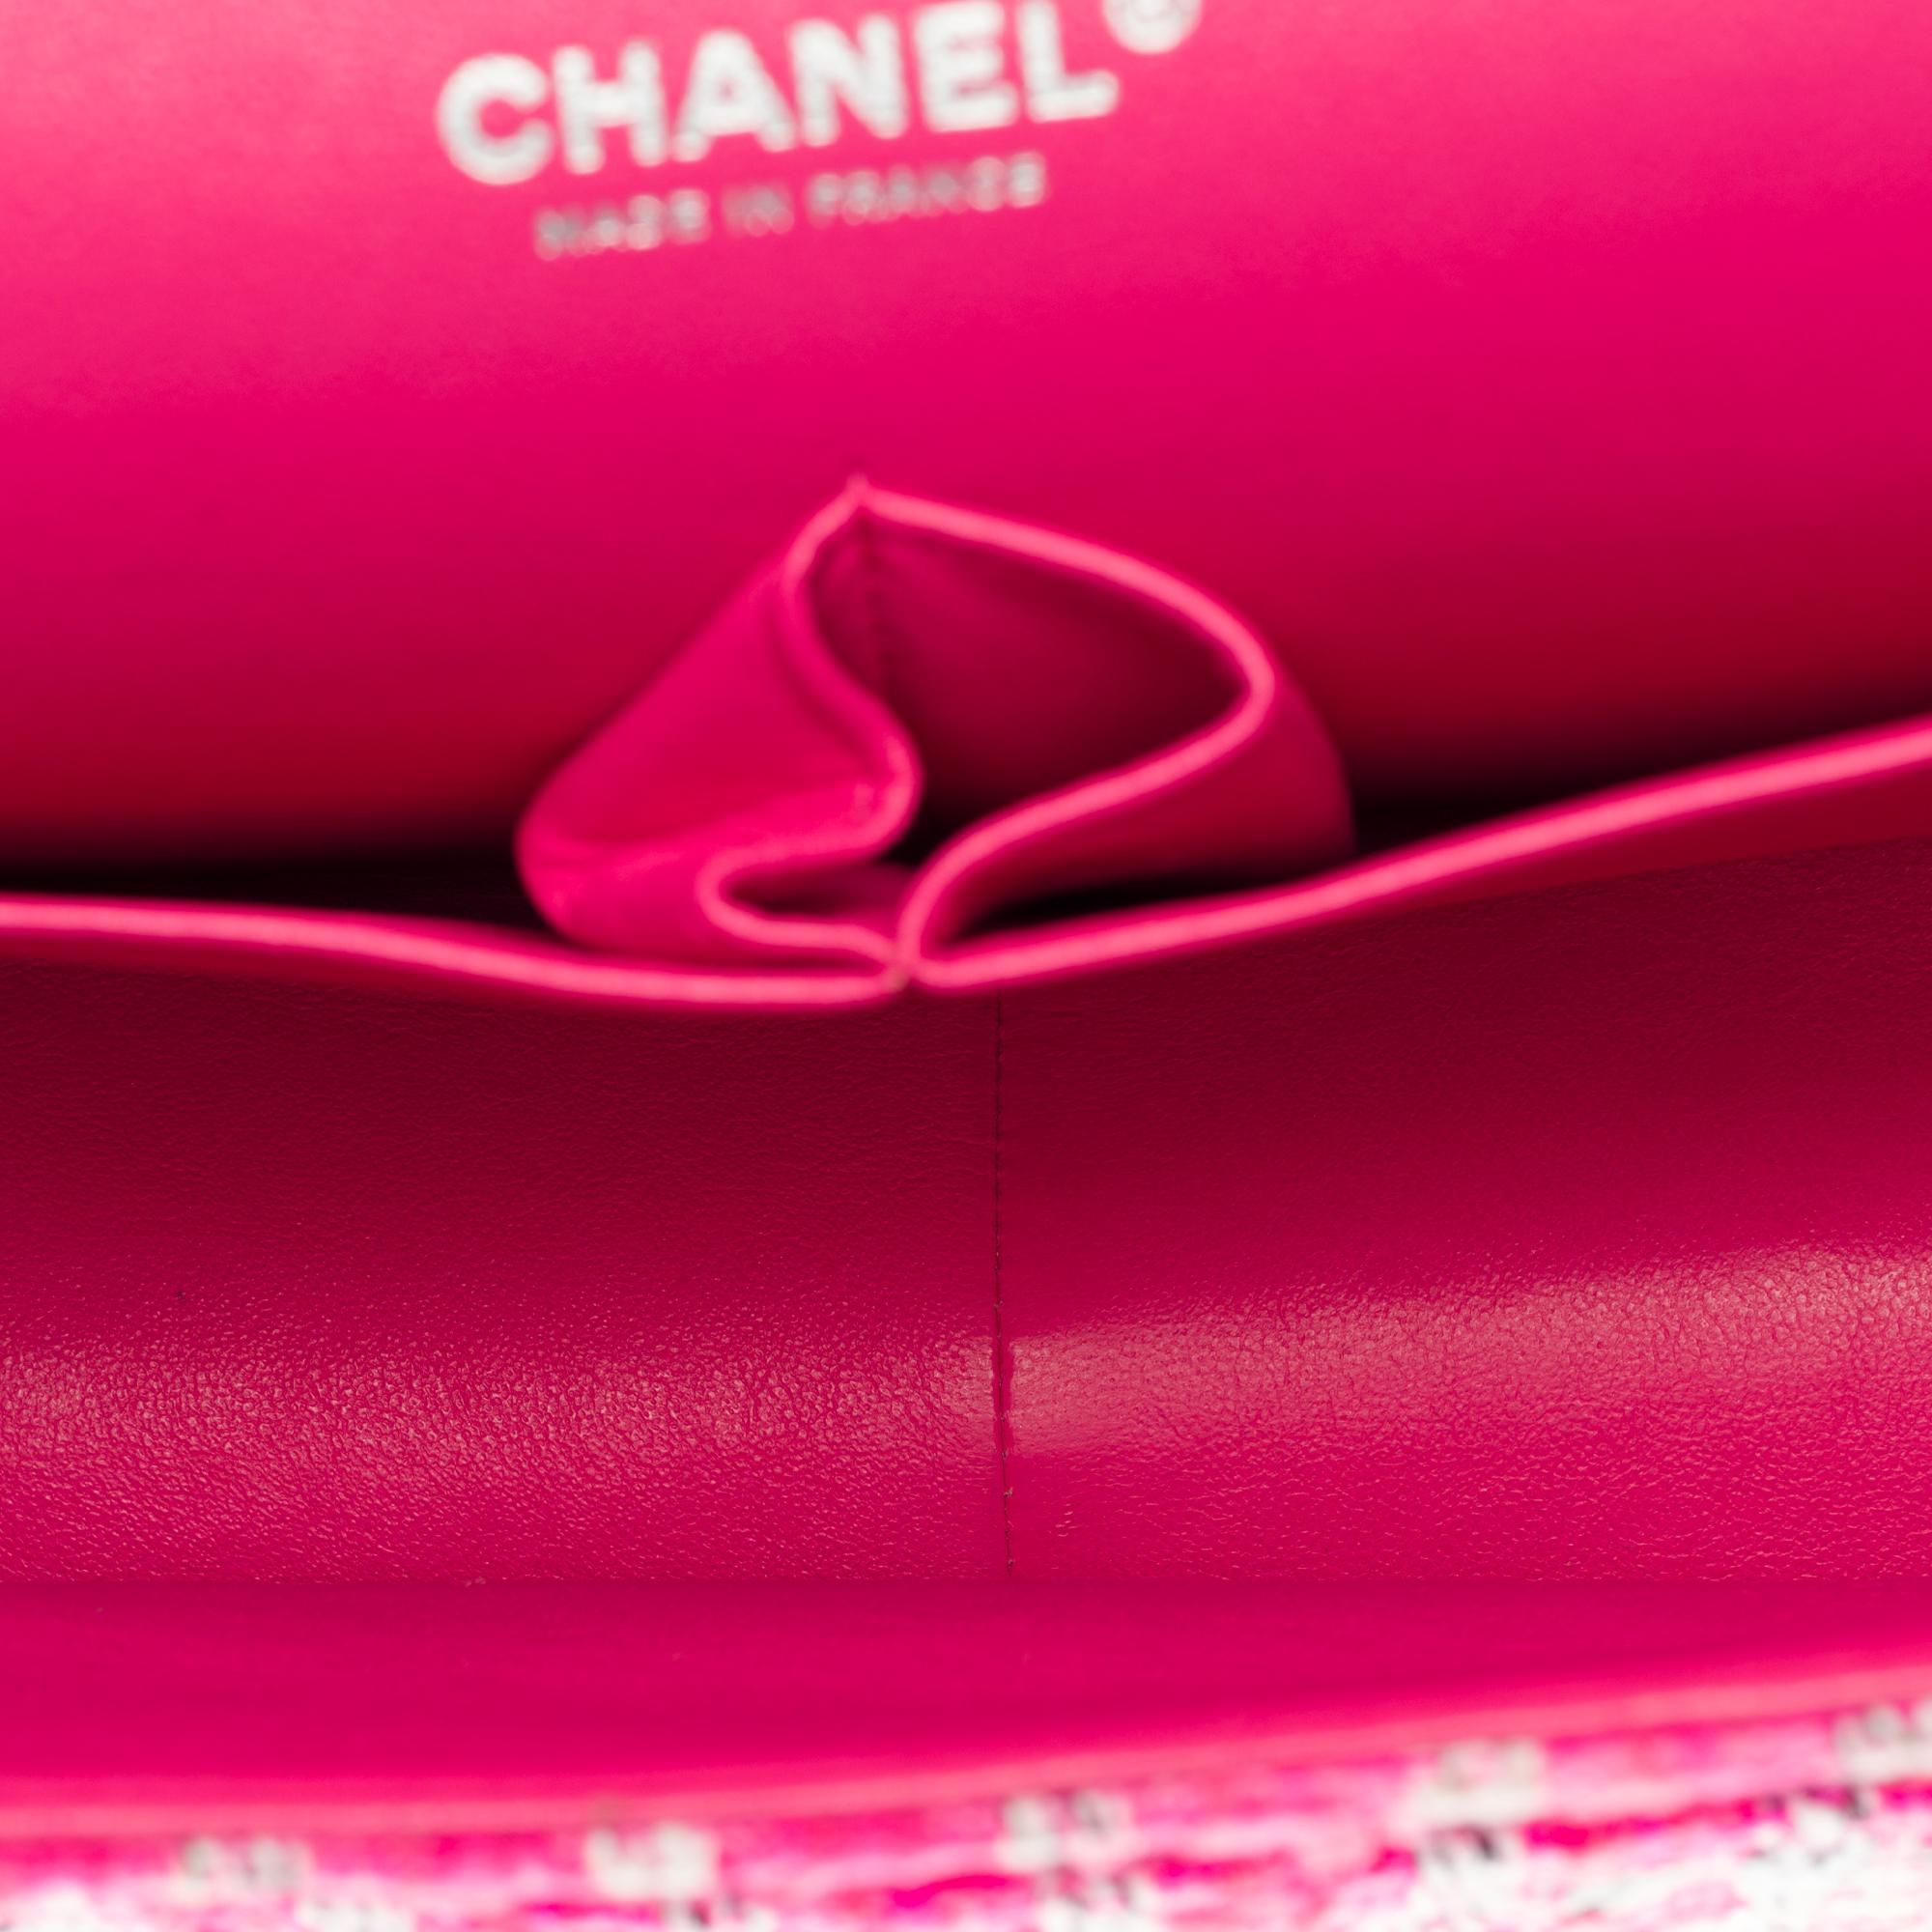 Limited Edition Chanel Timeless Jumbo Shoulder bag in Pink Tweed with SHW 2